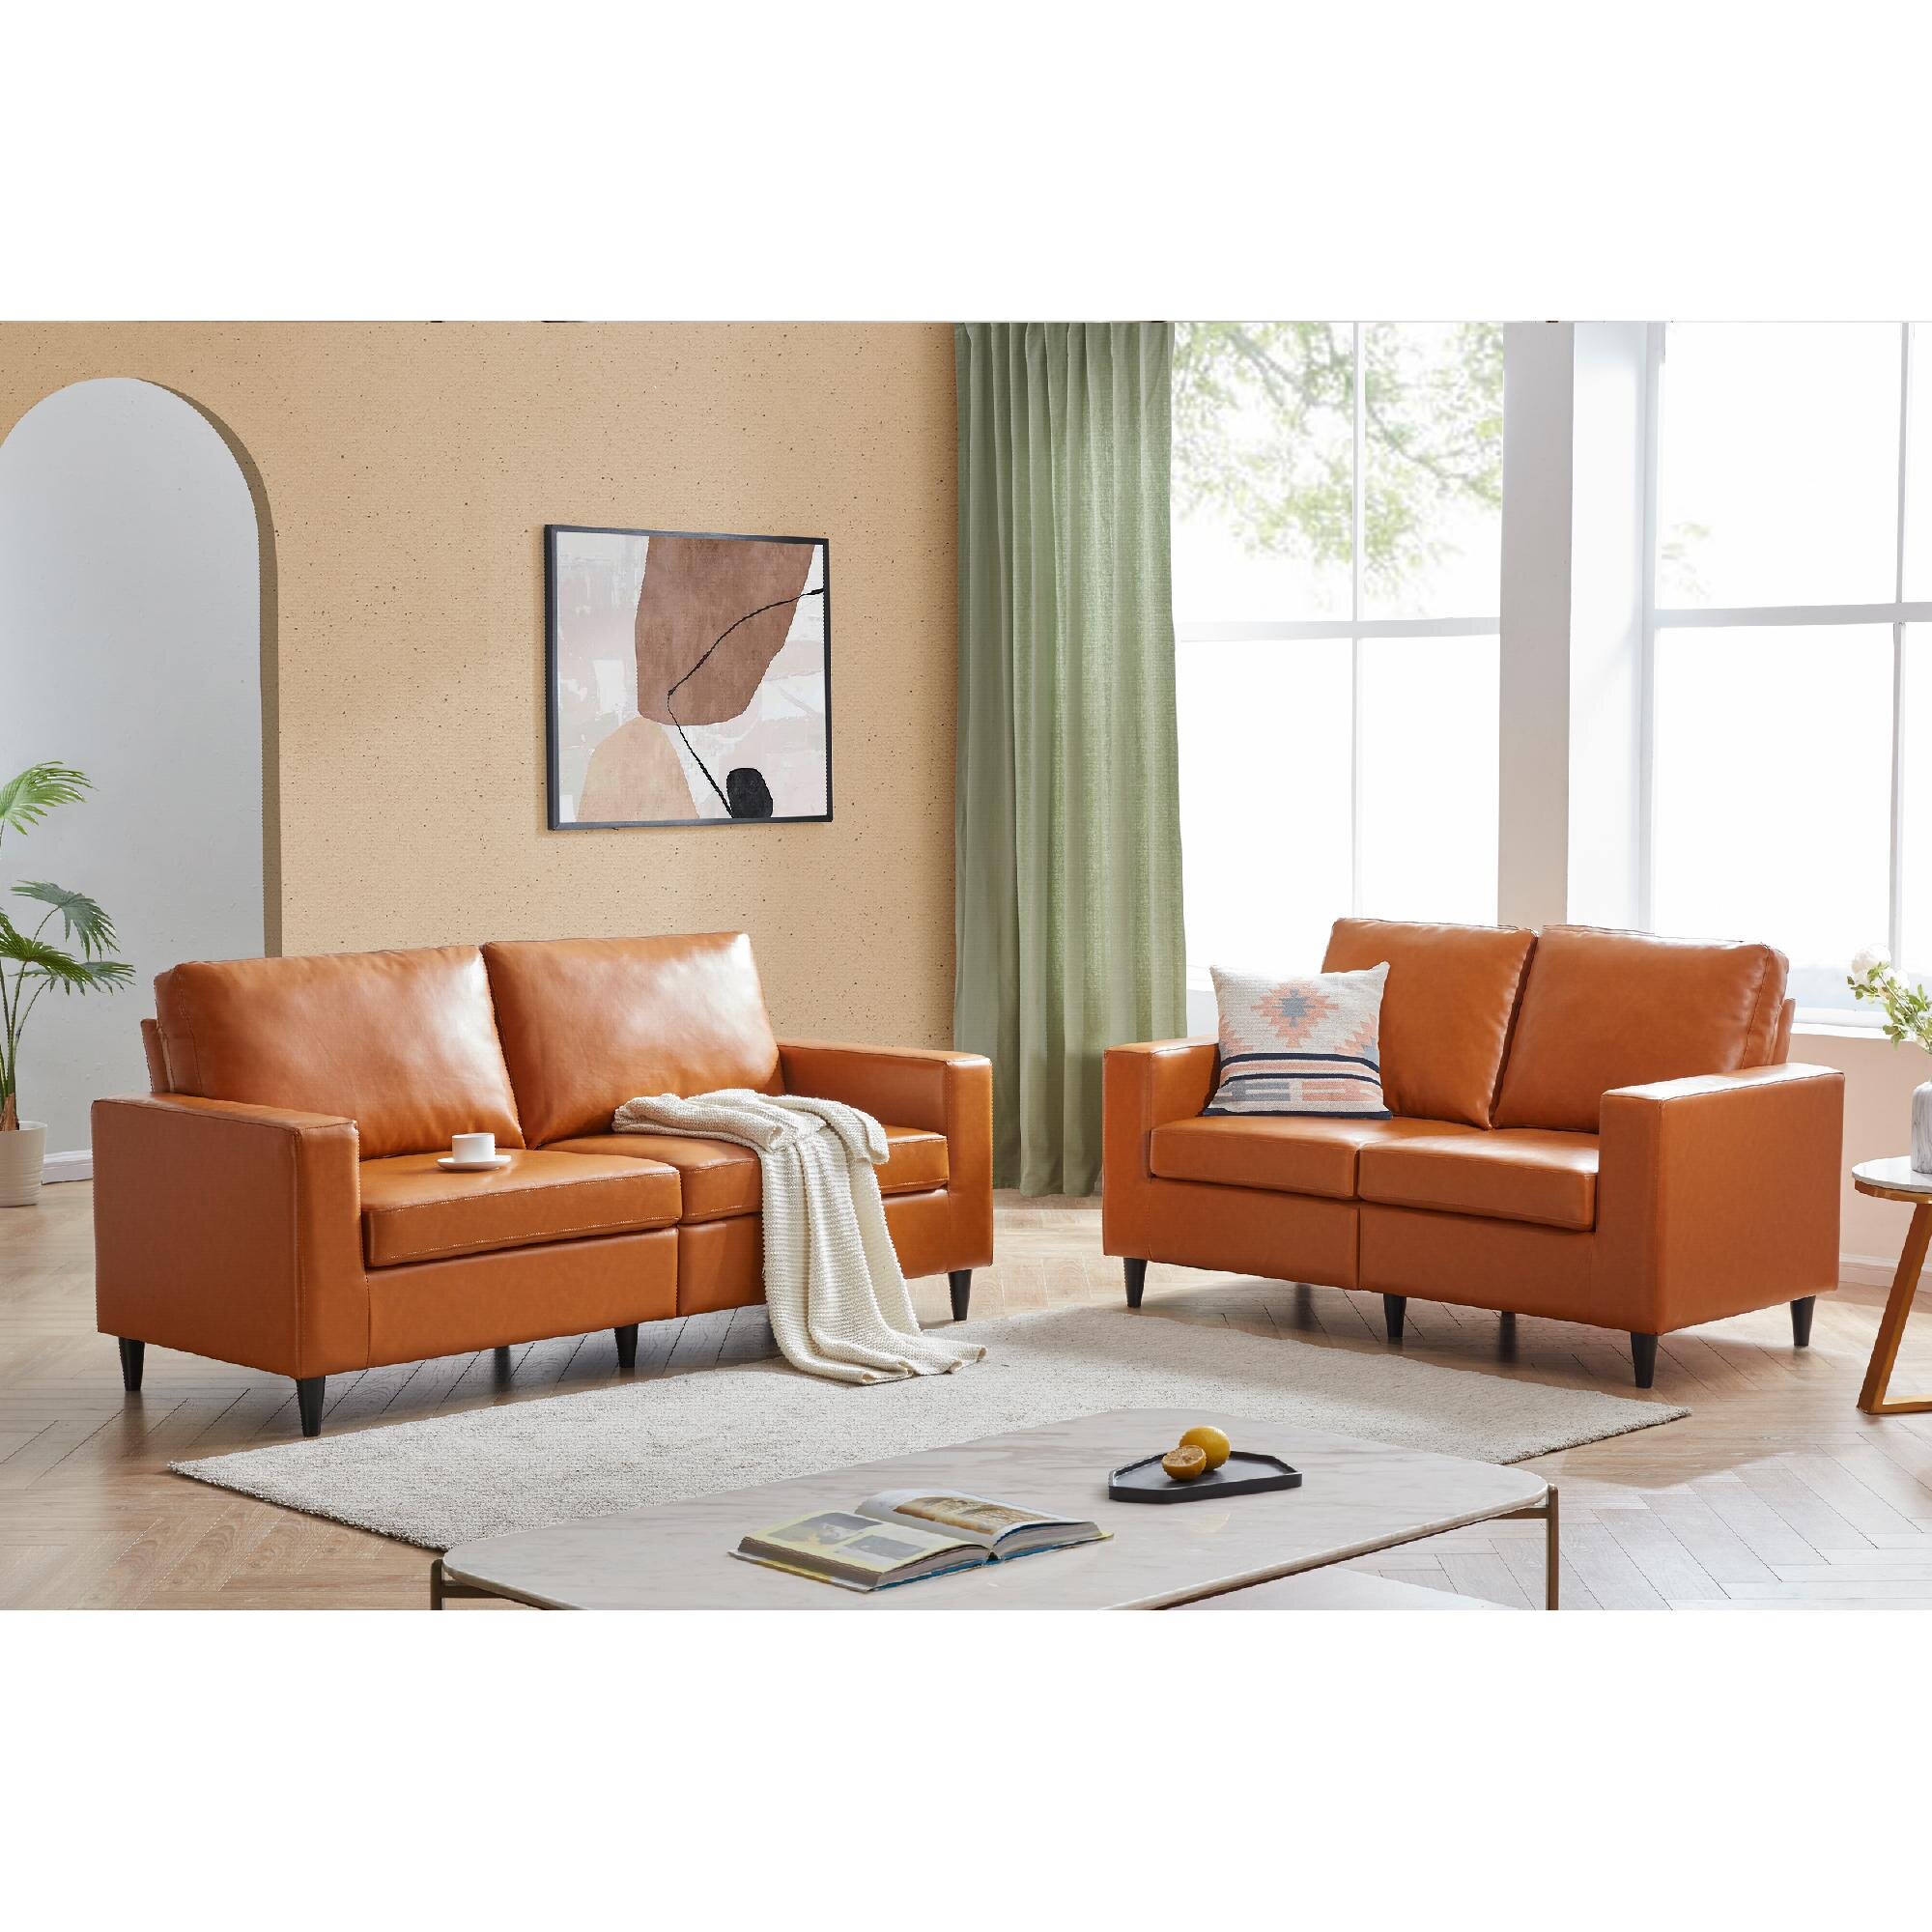 Sofa and Loveseat Sets Morden Style PU Leather Couch Furniture Upholstered 3 Seat Sofa Couch and Loveseat for Home or Office 2+3 Seat